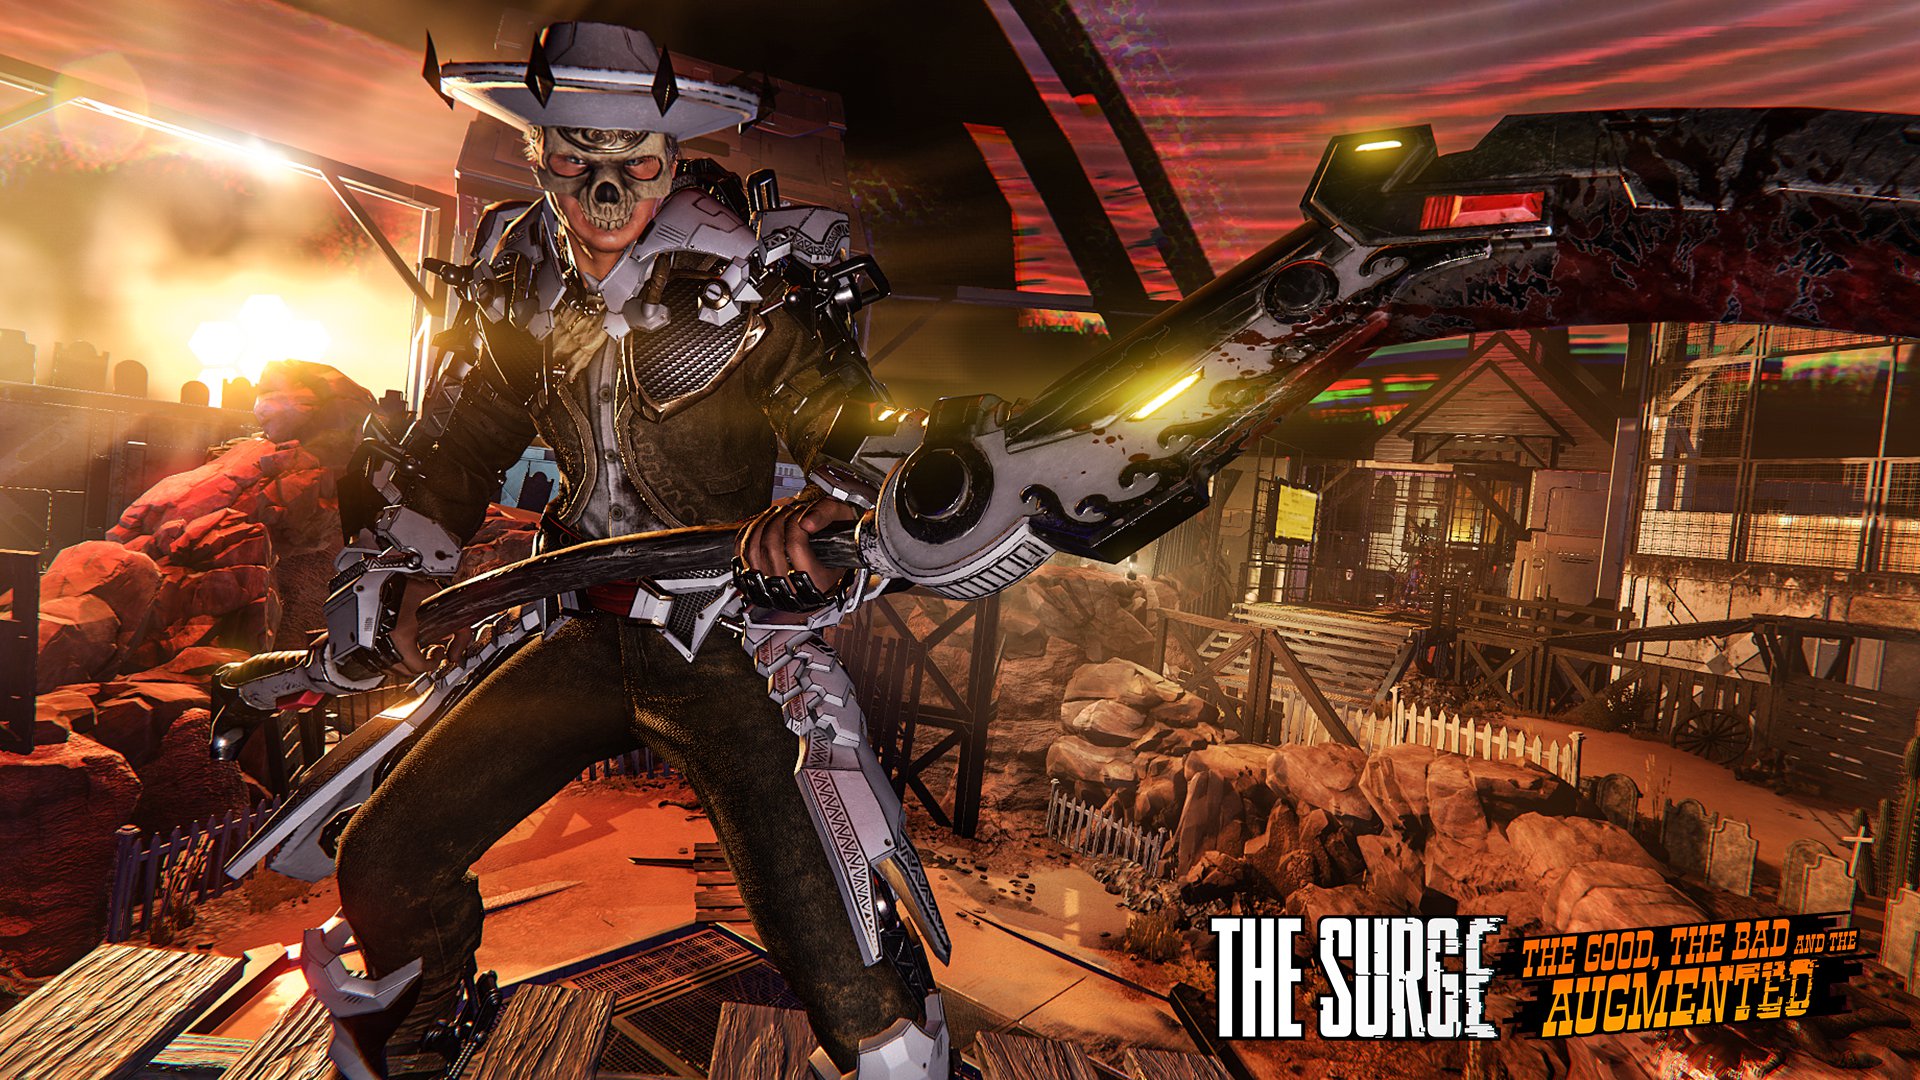 Download The Surge The Good the Bad and the Augmented-CODEX